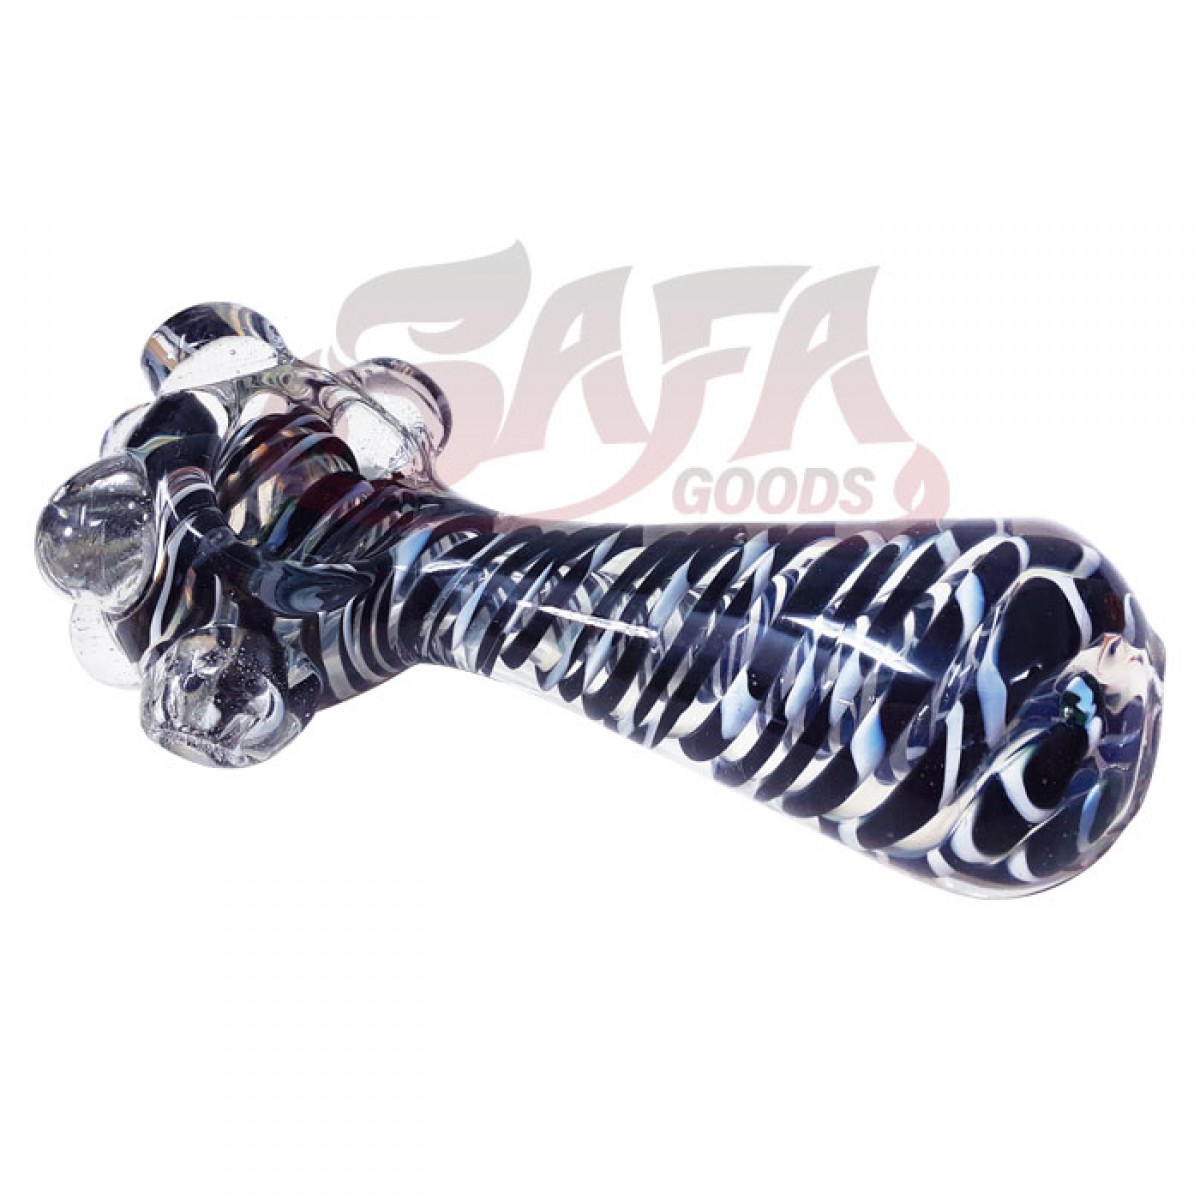 4 Inch Glass Hand Pipes - Linework and Bumps